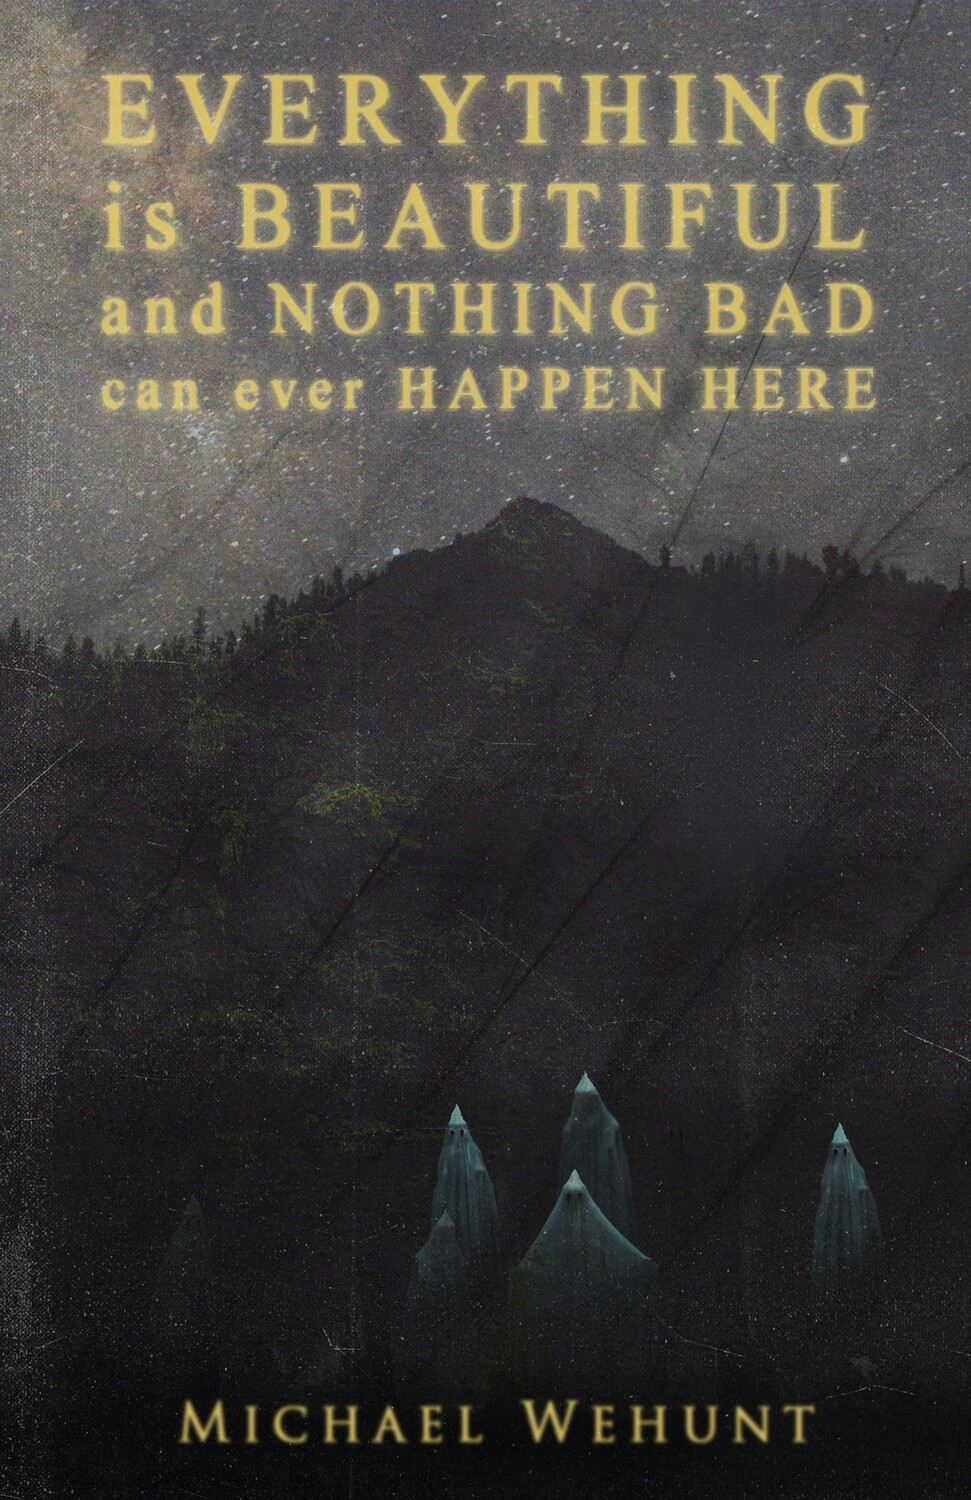 Everything Is Beautiful and Nothing Bad Can Ever Happen Here by Michael Wehunt (Charitable Chapbook #5, eBook edition)